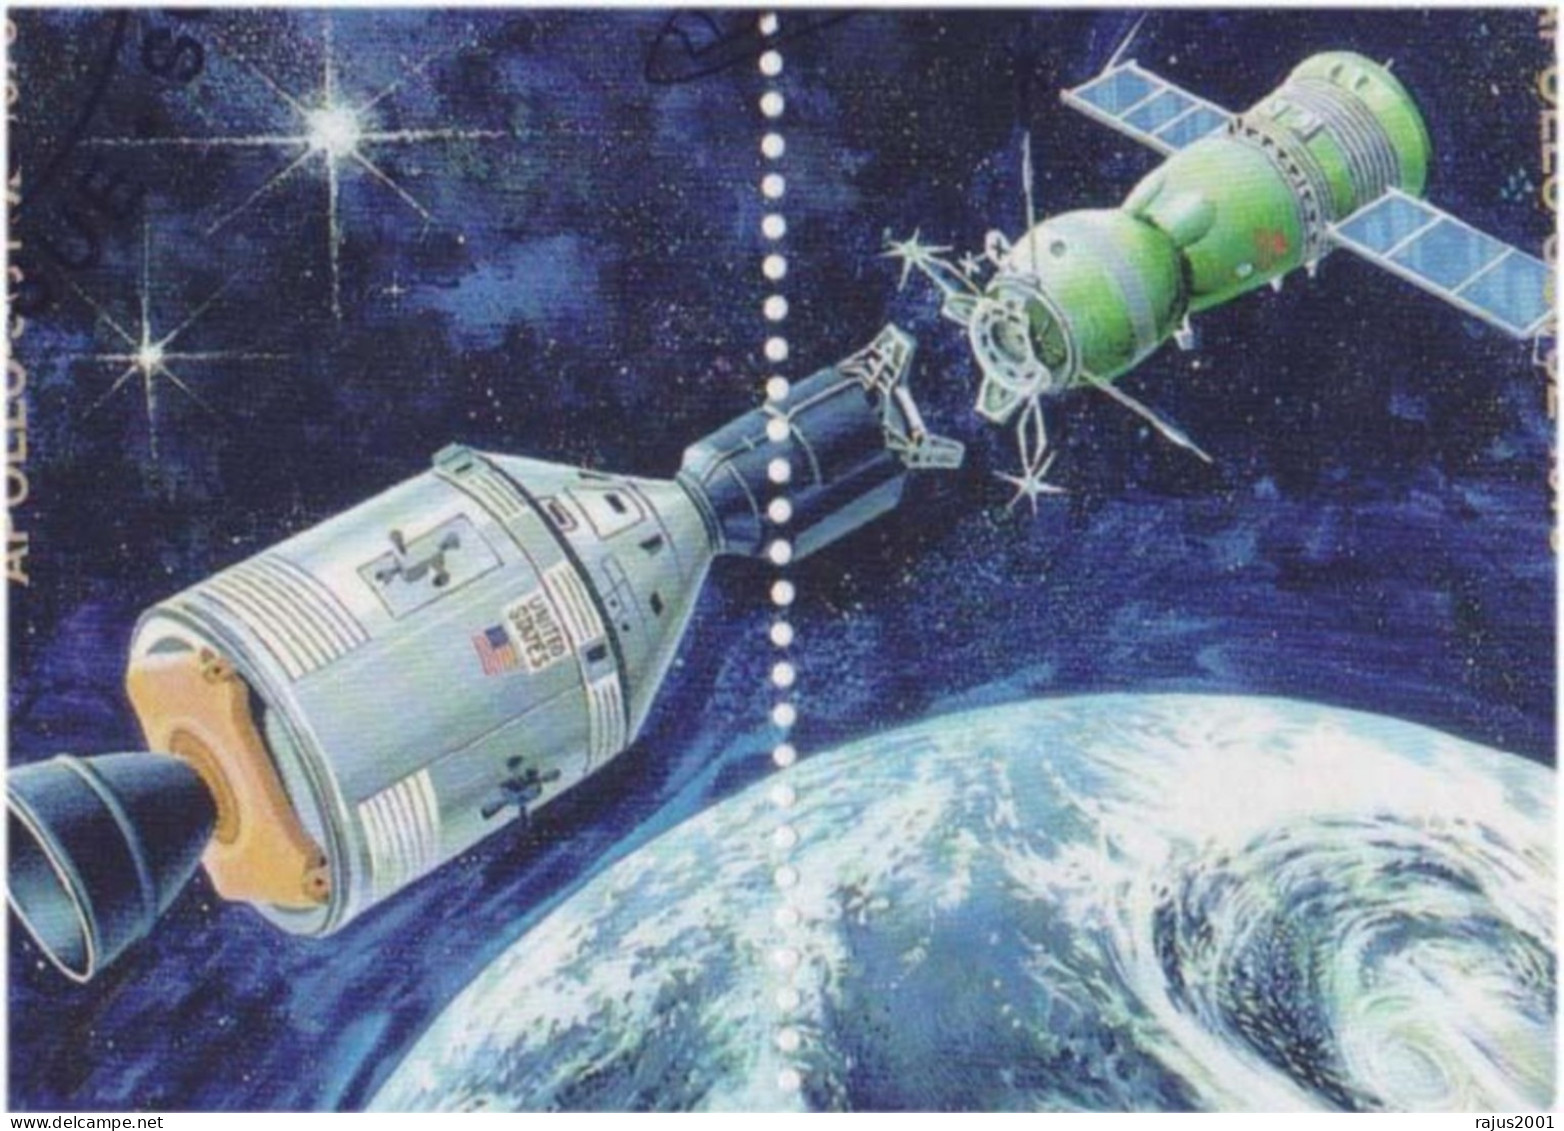 MIR Shuttle APOLLO-SOYUZ Link Up, First Joint Space Flight Between US And USSR, Earth, Planet, Astronomy, Marshall FDC - Astronomy